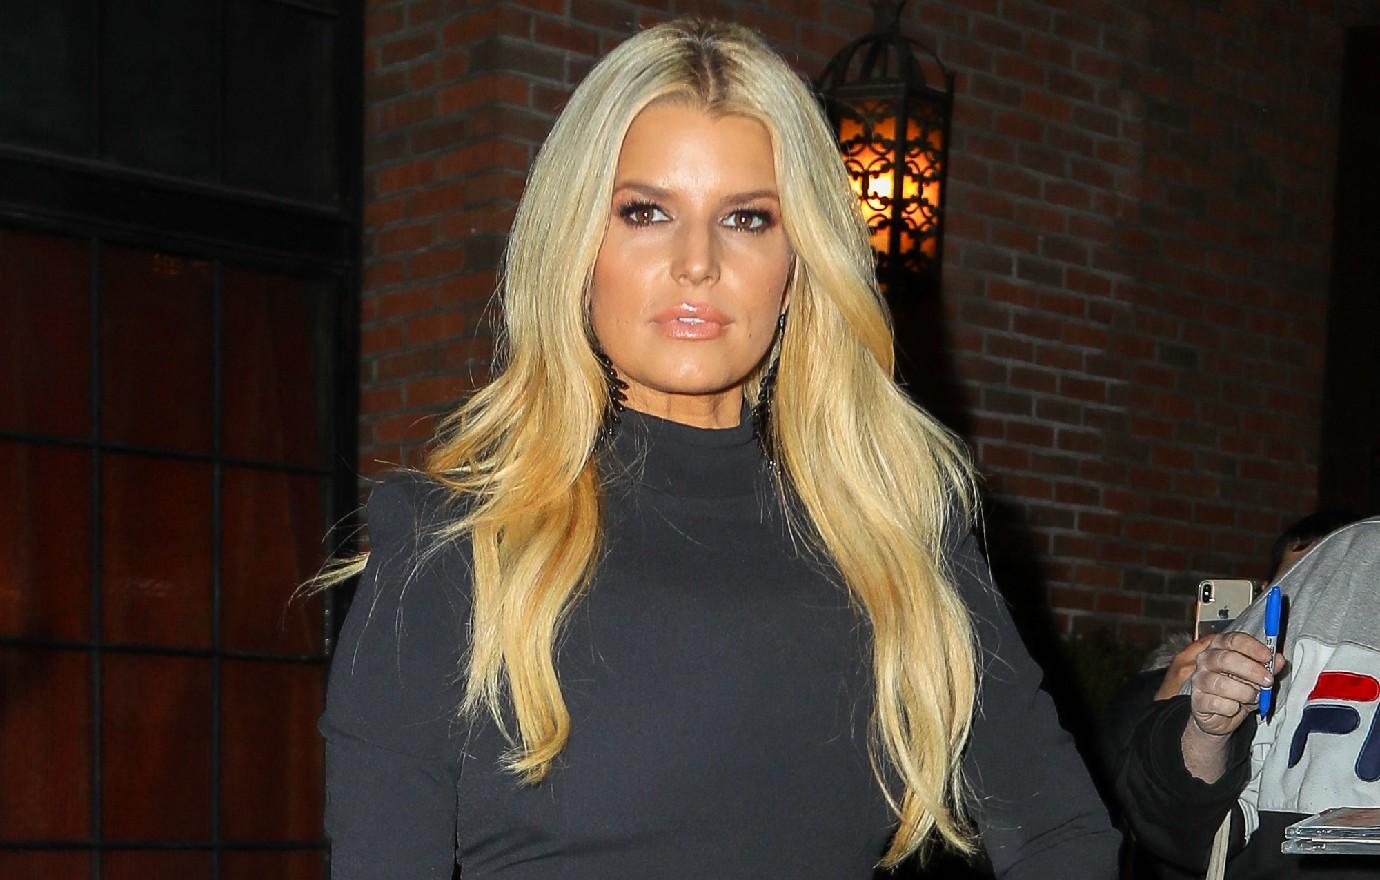 Jessica Simpson Celebrates 6 Years Of Sobriety By Reposting Old Photo